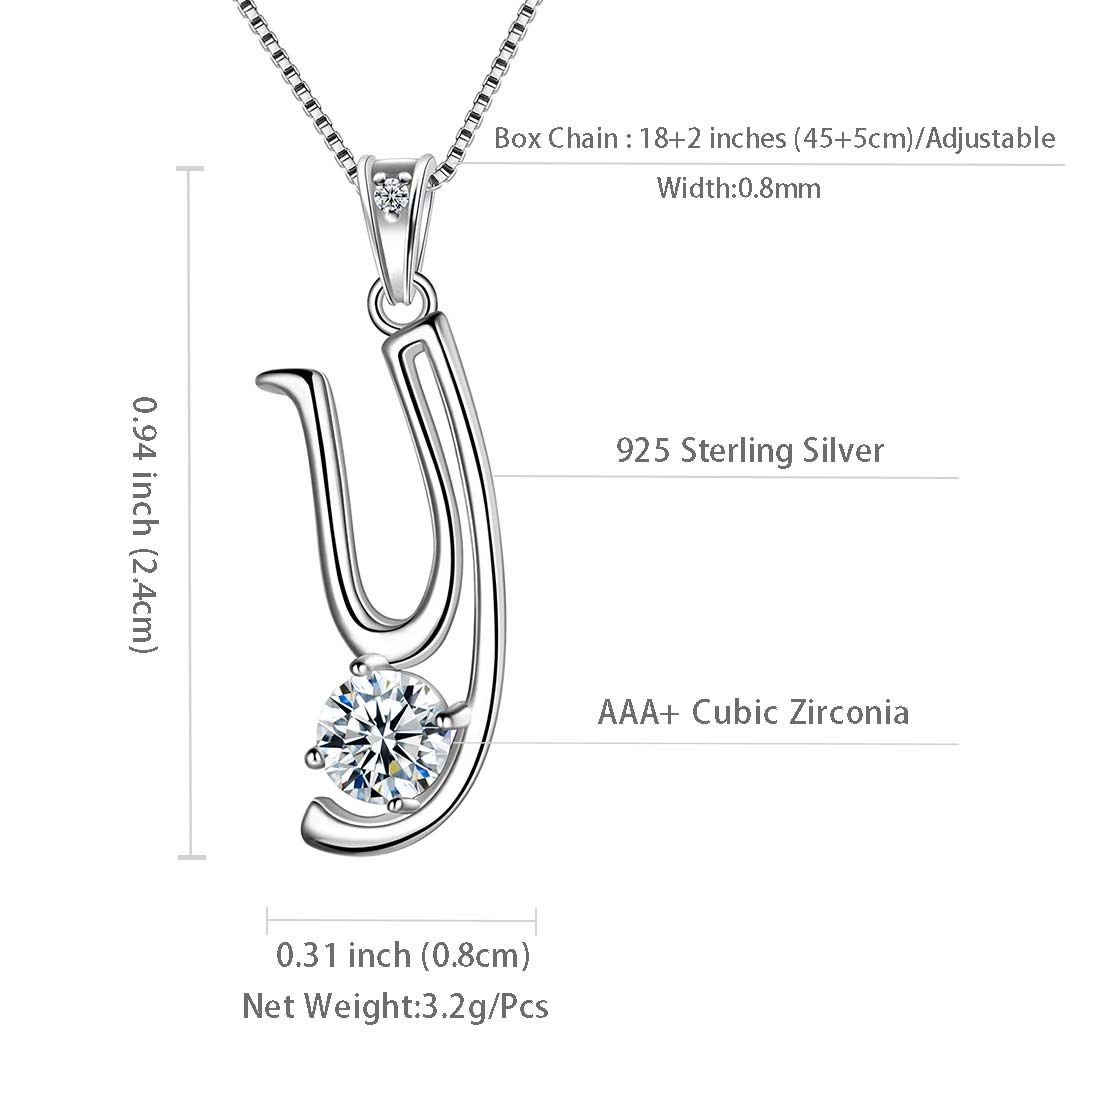 Women Letter Y Initial Necklaces Sterling Silver - Necklaces - Aurora Tears Jewelry